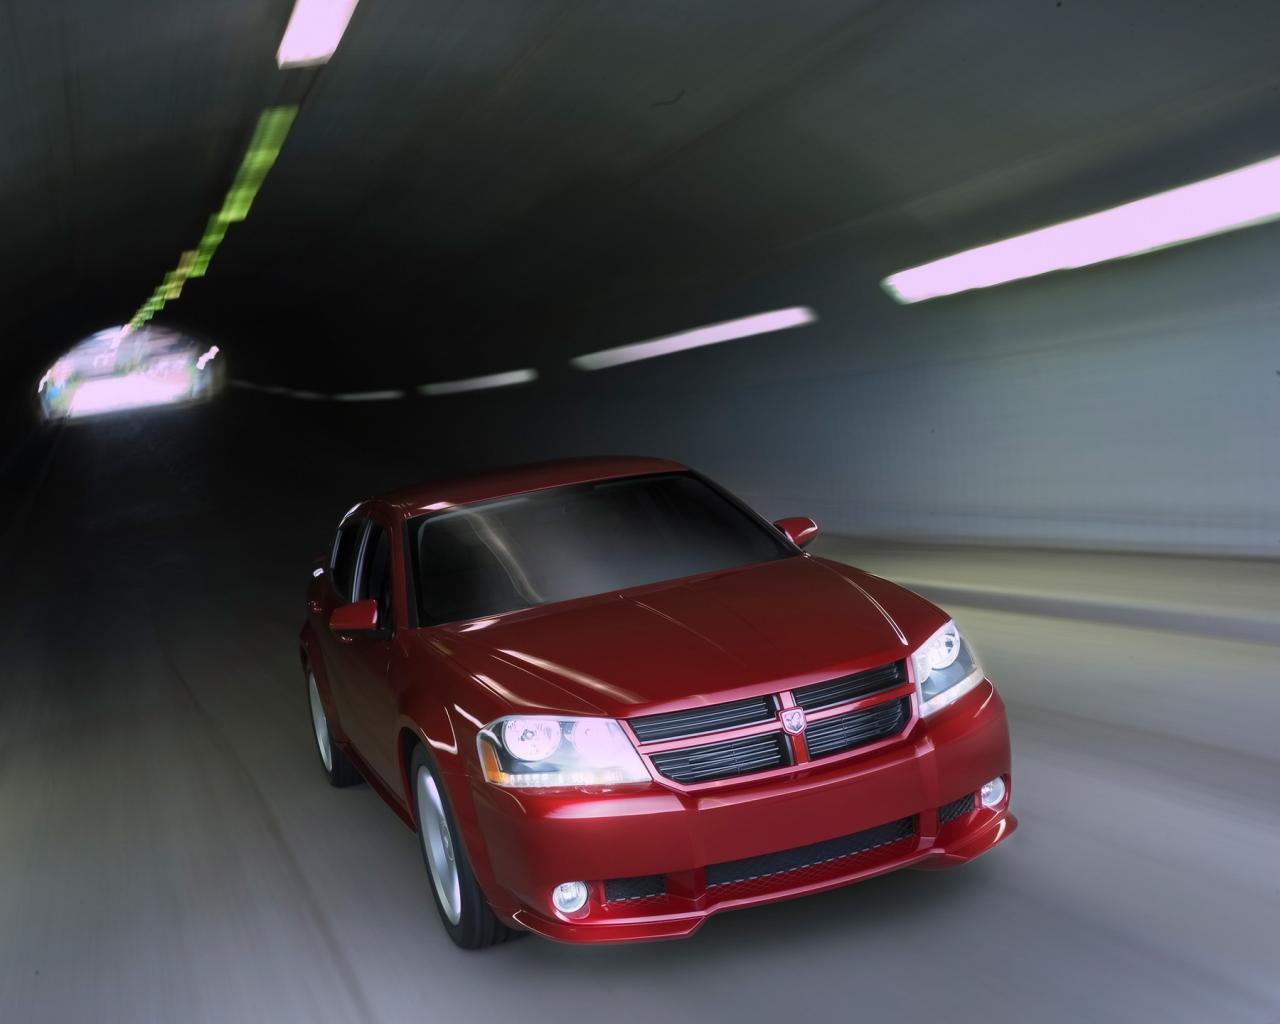 2006 Dodge Avenger Concept Front Angle Drive 1280x1024